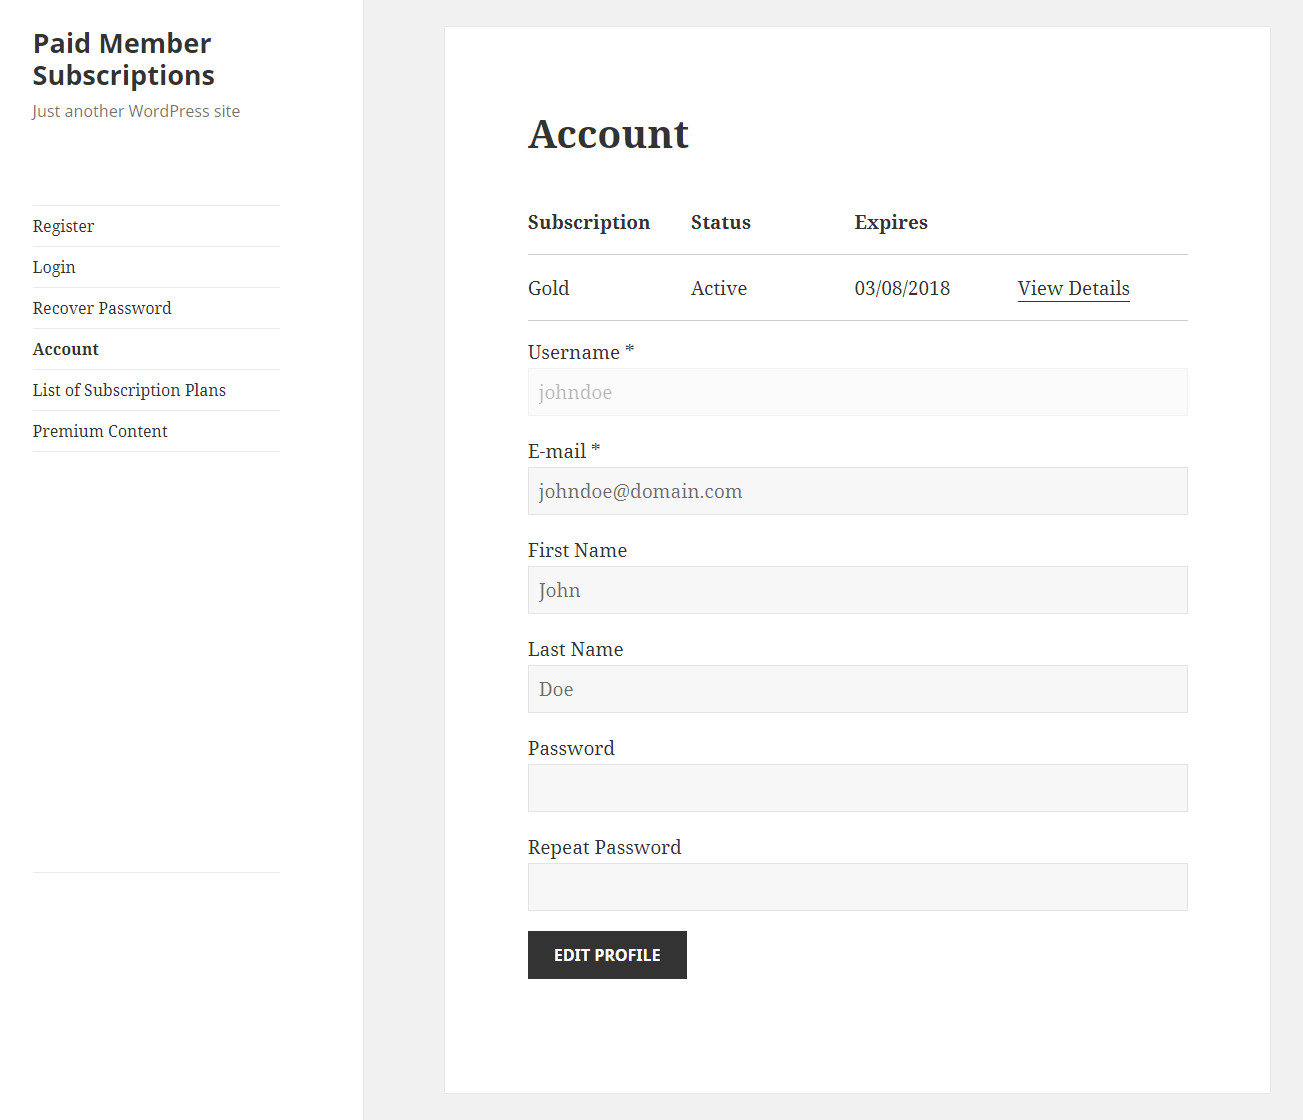 Paid Member Subscriptions Pro - Navigation Menu Filtering - Logged In Member